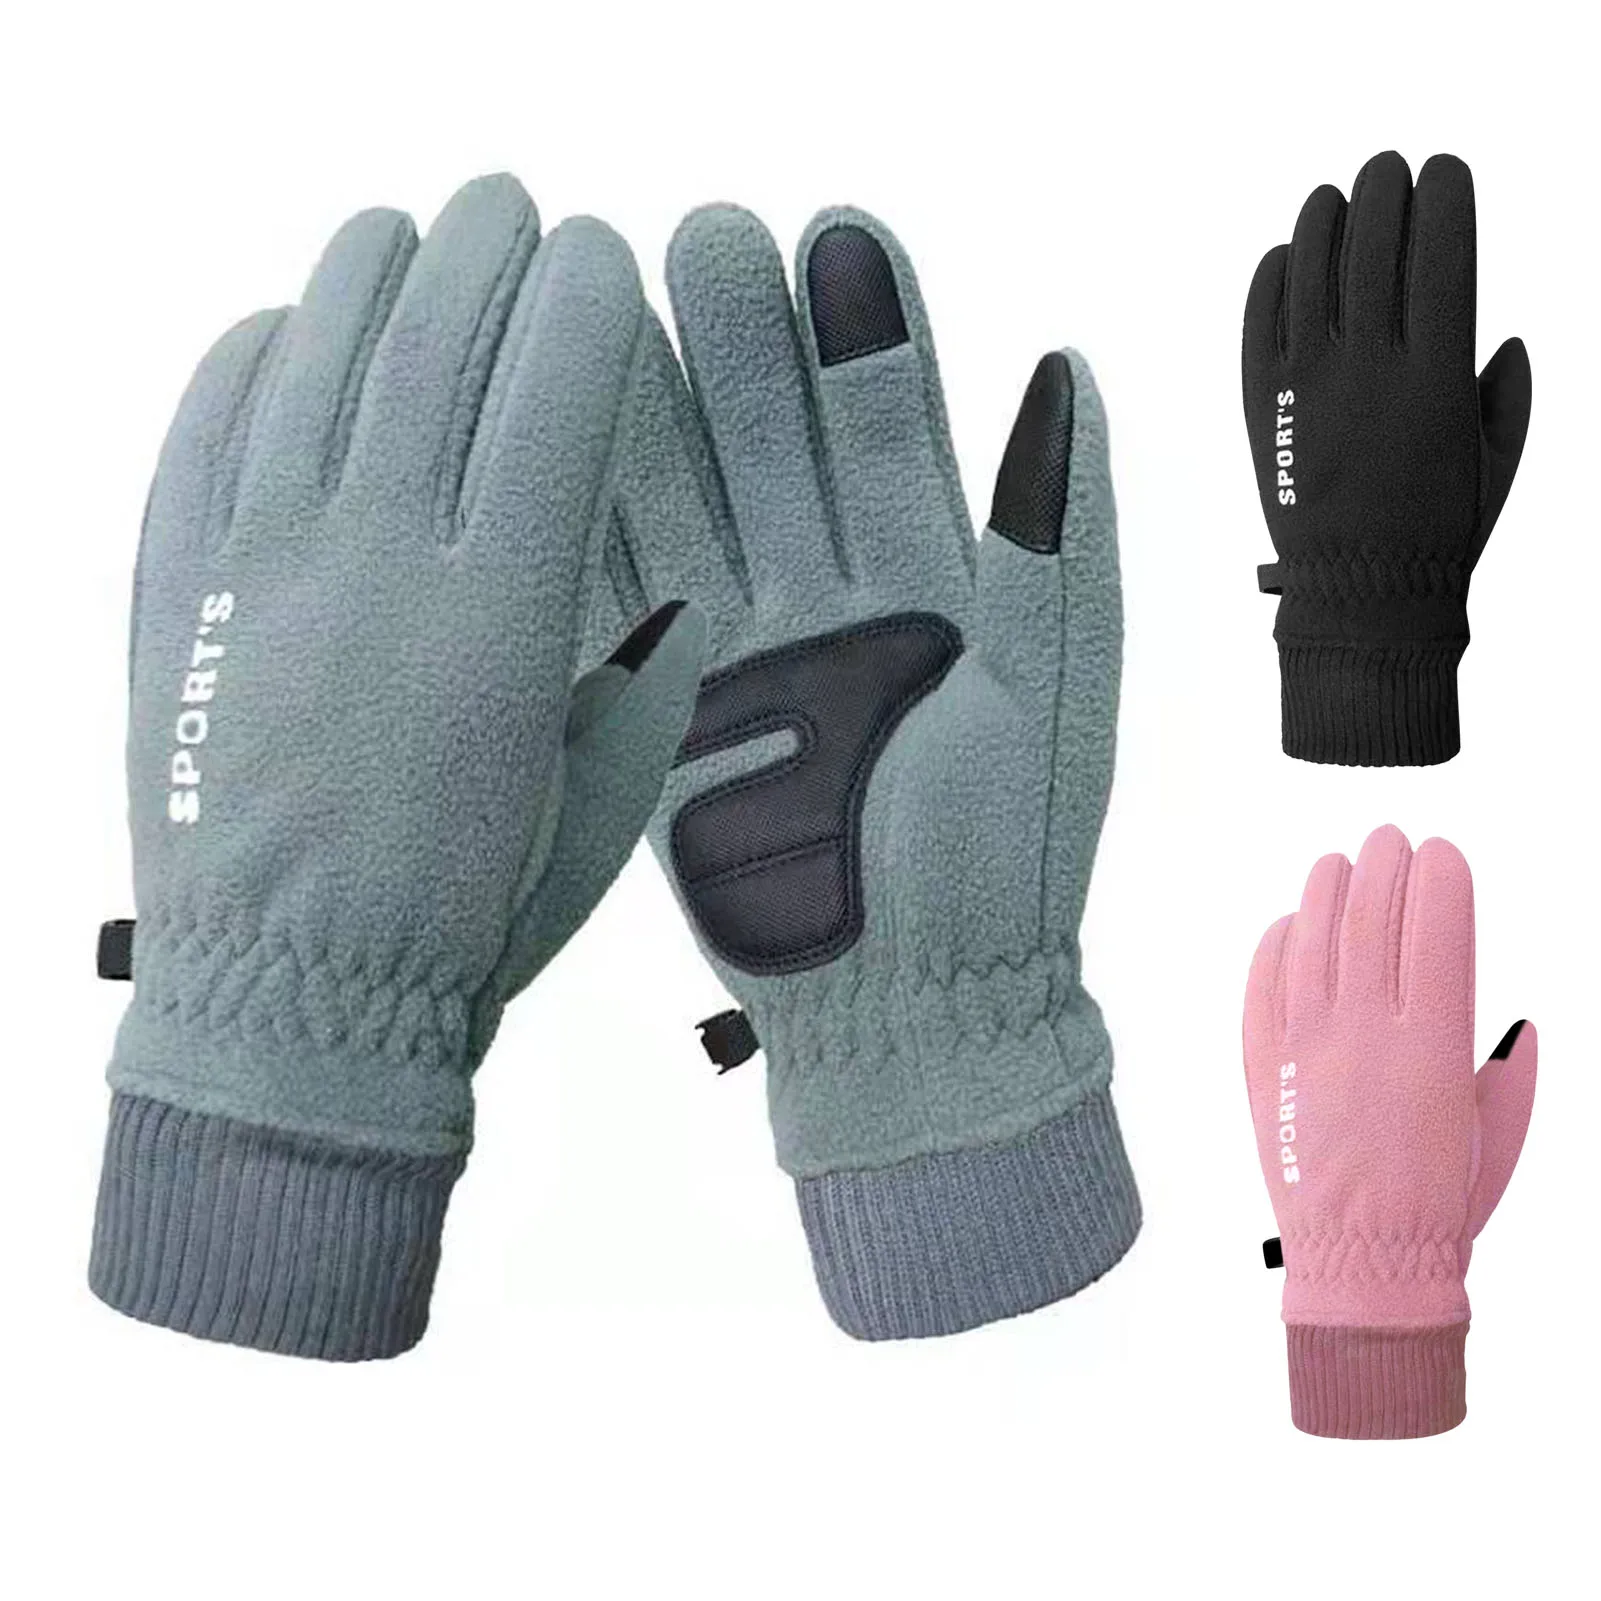 Winter Thermal Warm Polar Fleece Gloves for MTB Road Bike Cycling Bicycle Riding 